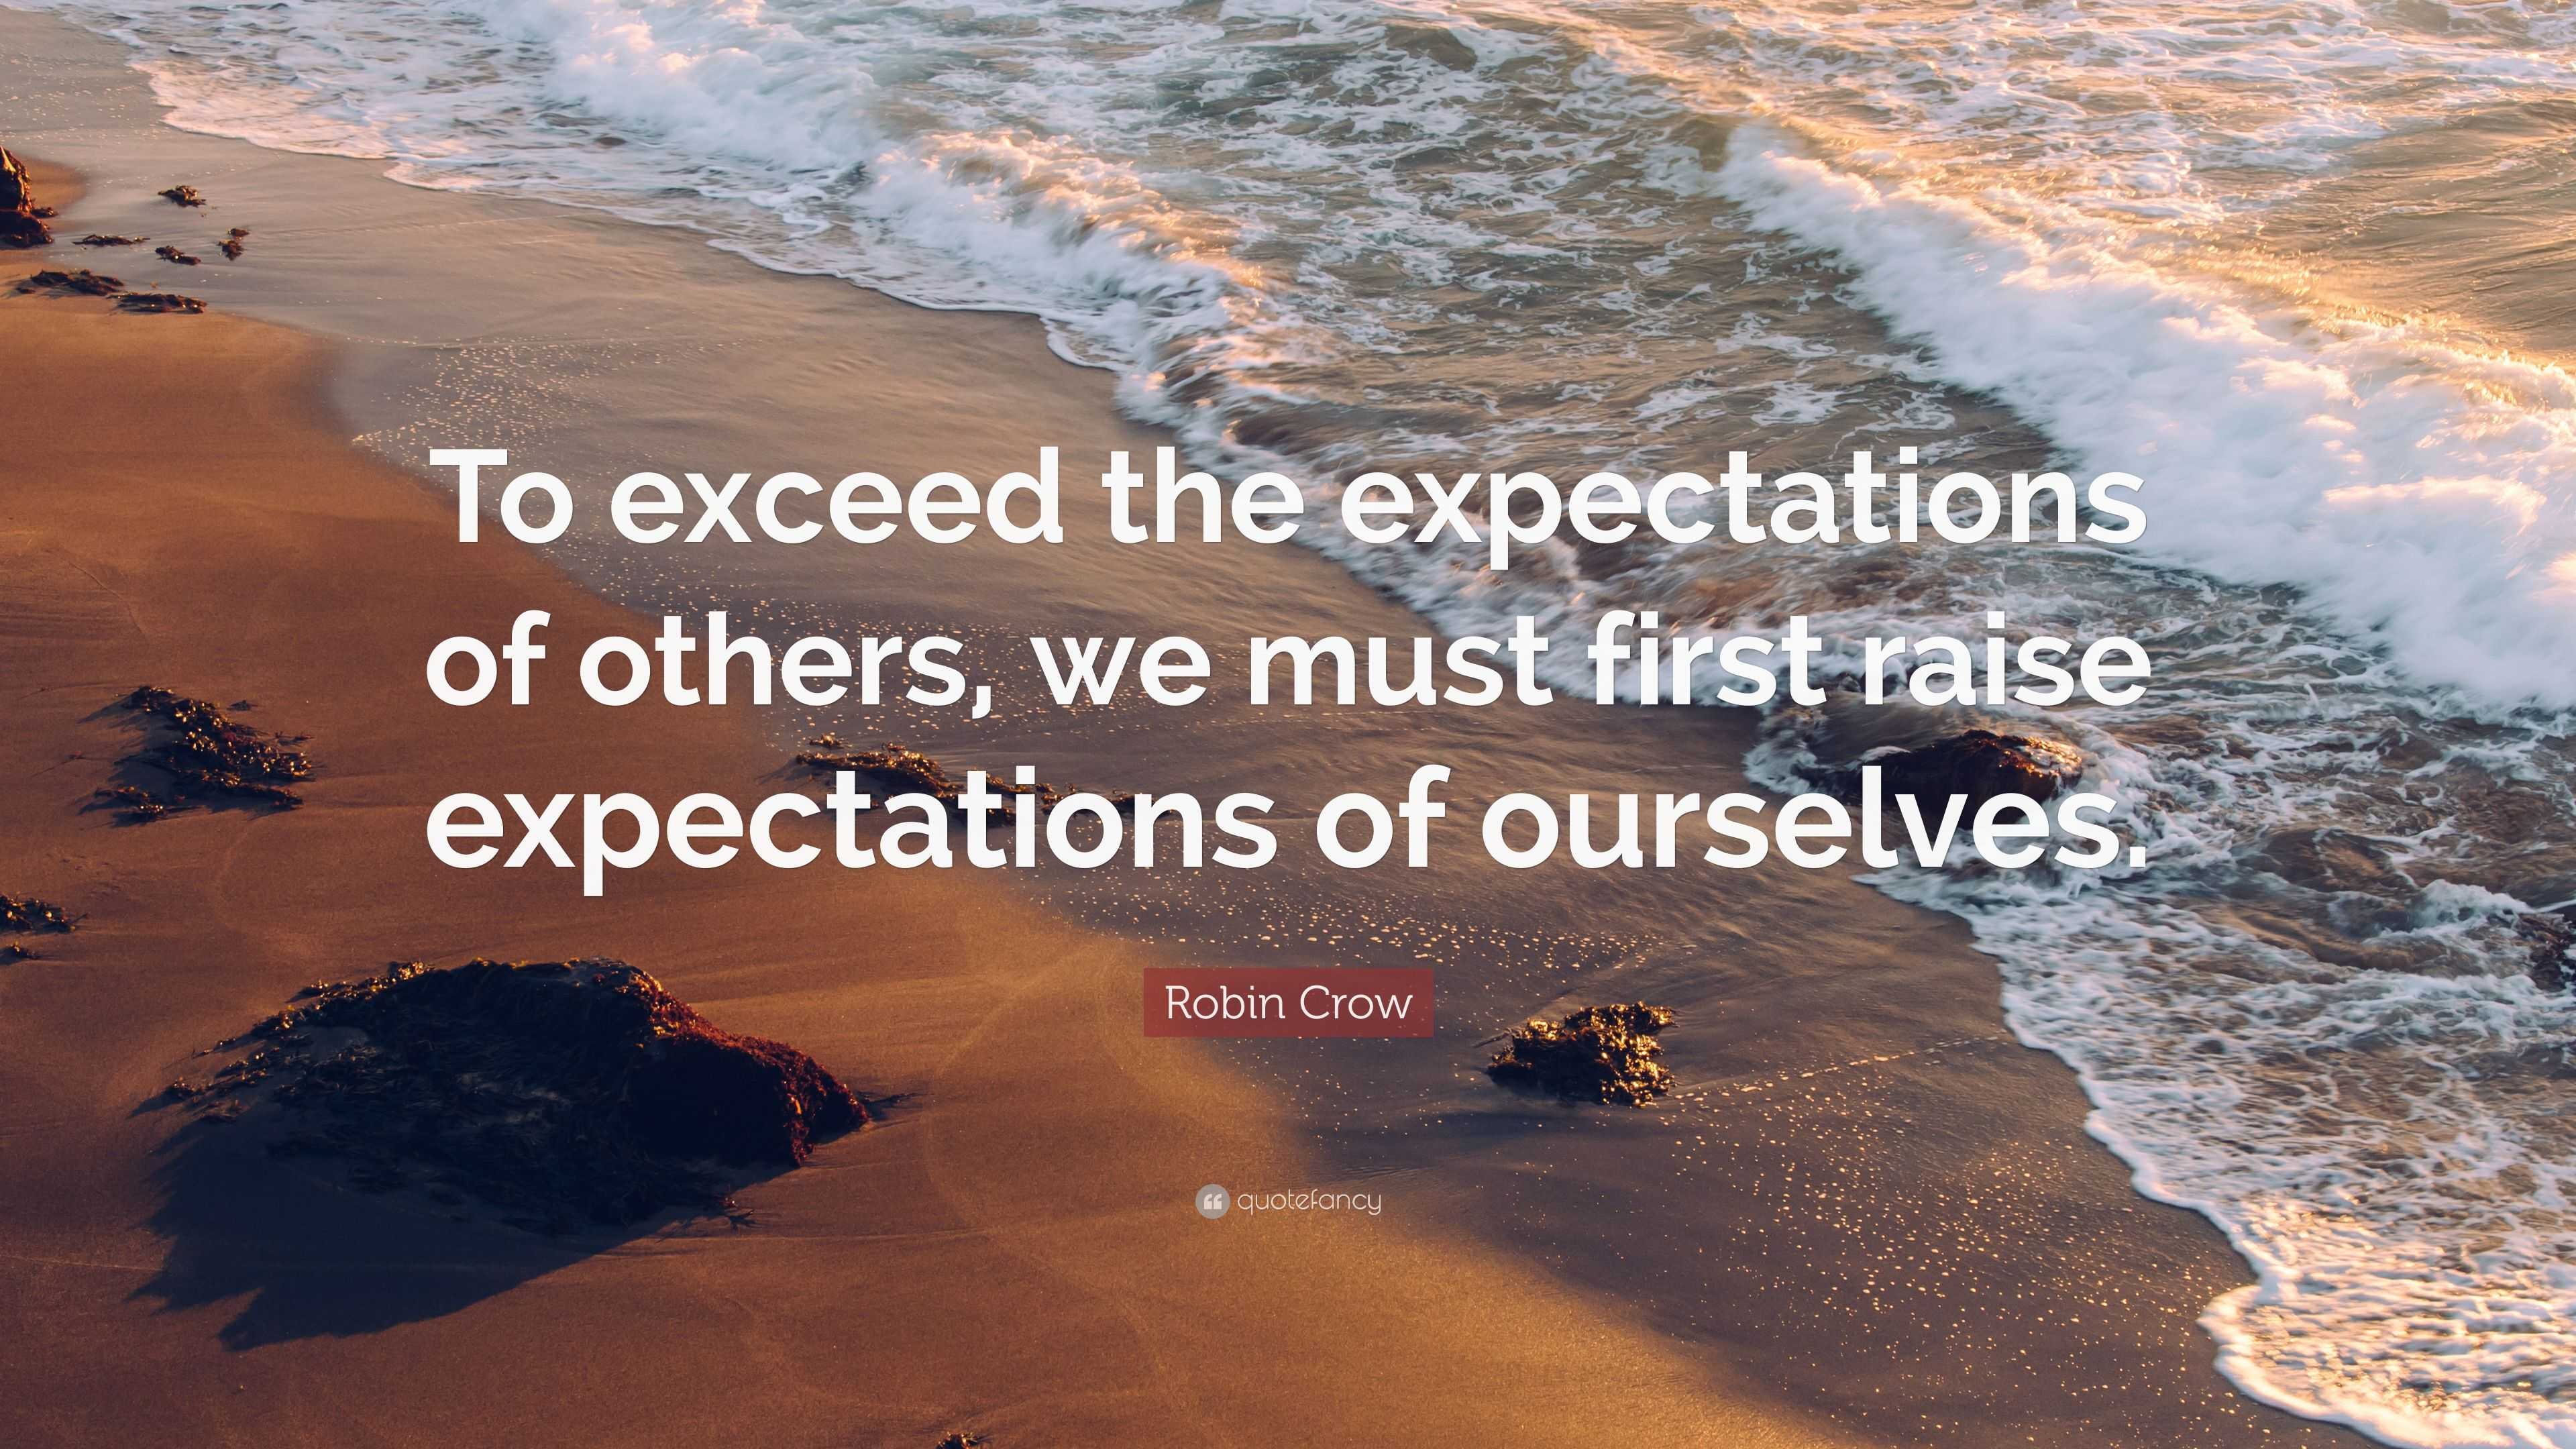 Robin Crow Quote: “To exceed the expectations of others, we must first ...